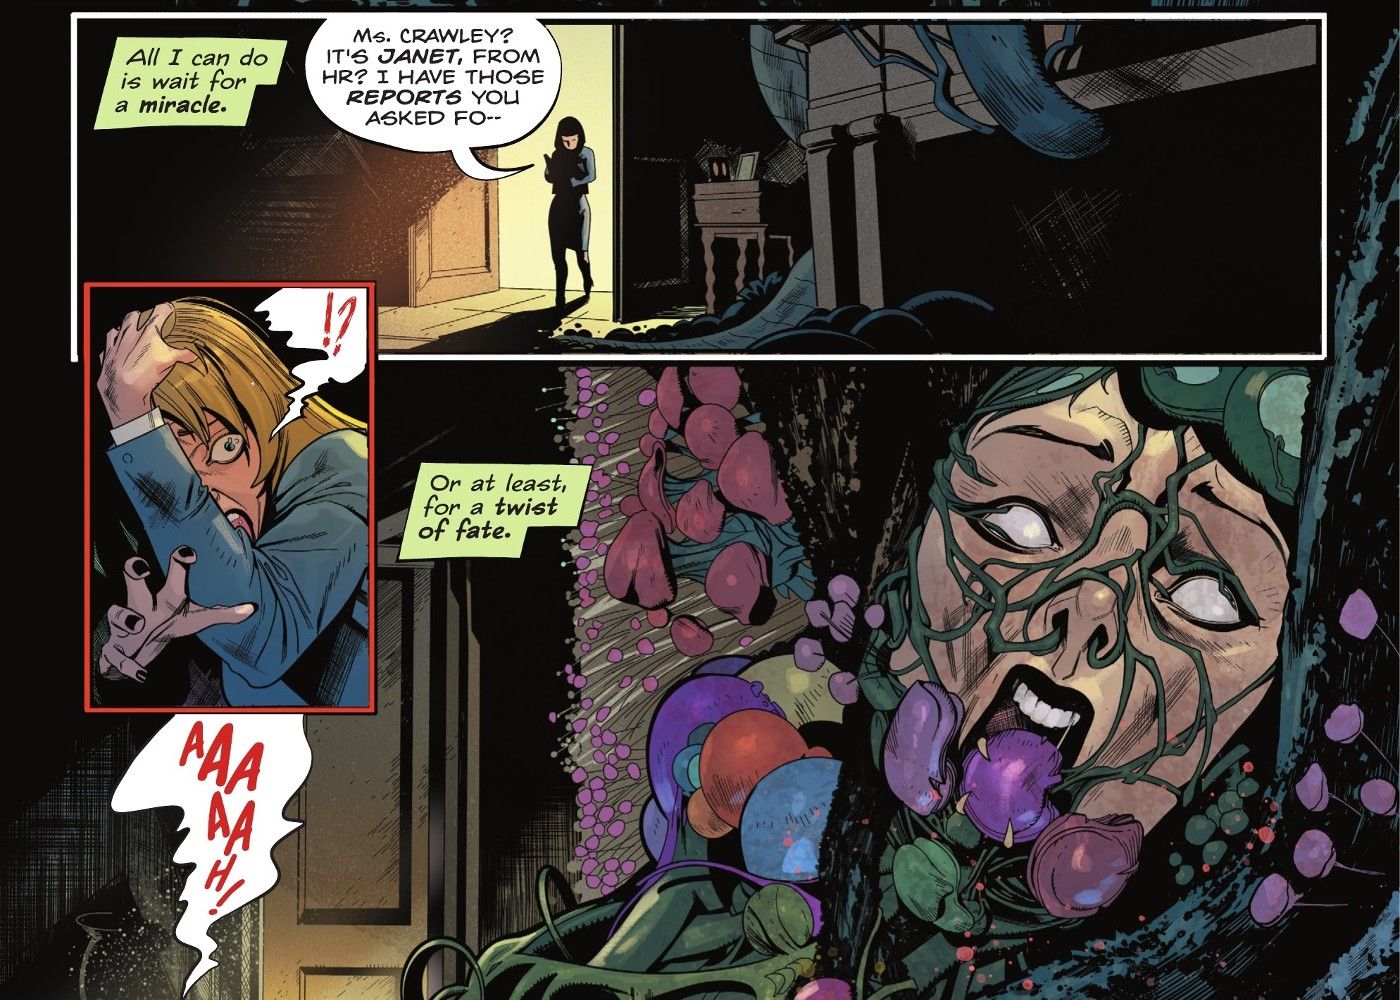 Poison Ivy Dying of lamia spores in Poison Ivy #7 